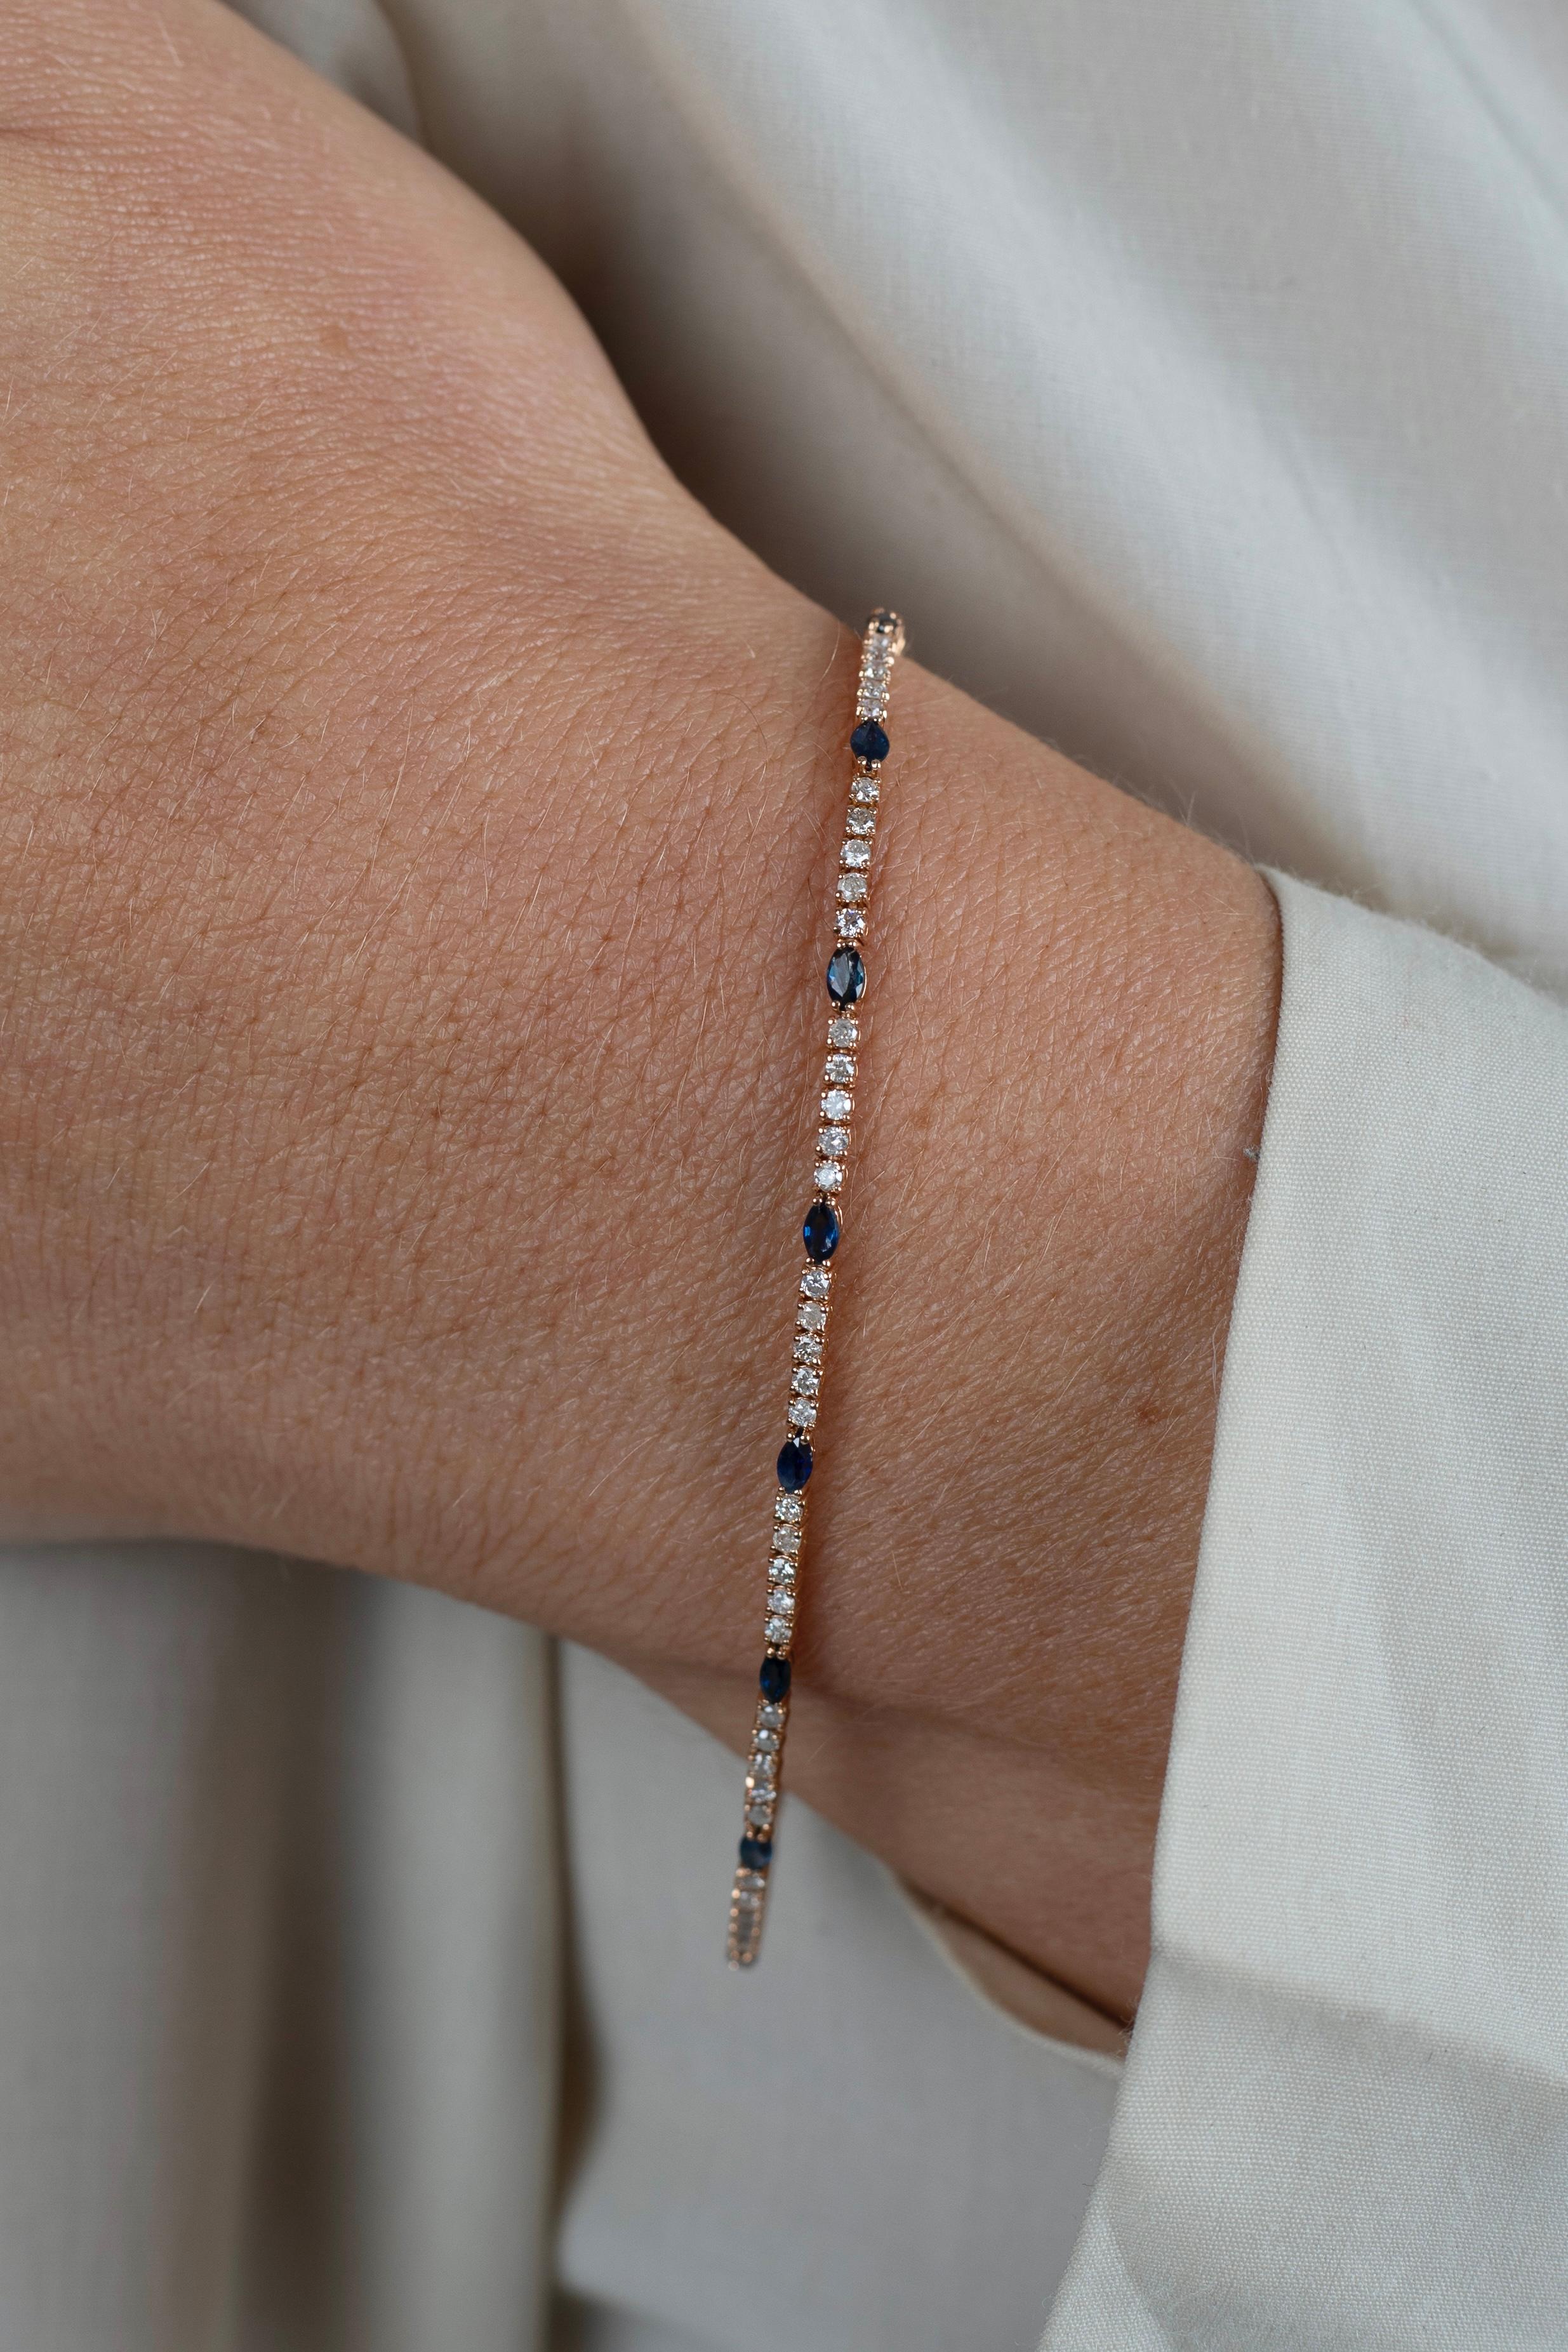 Discover the unique charm of this elegant tennis bracelet, featuring a combination of natural round-cut diamonds and marquise-cut blue sapphires. Set in 18 karat rose gold, this piece offers a refreshing take on the classic diamond tennis bracelet.